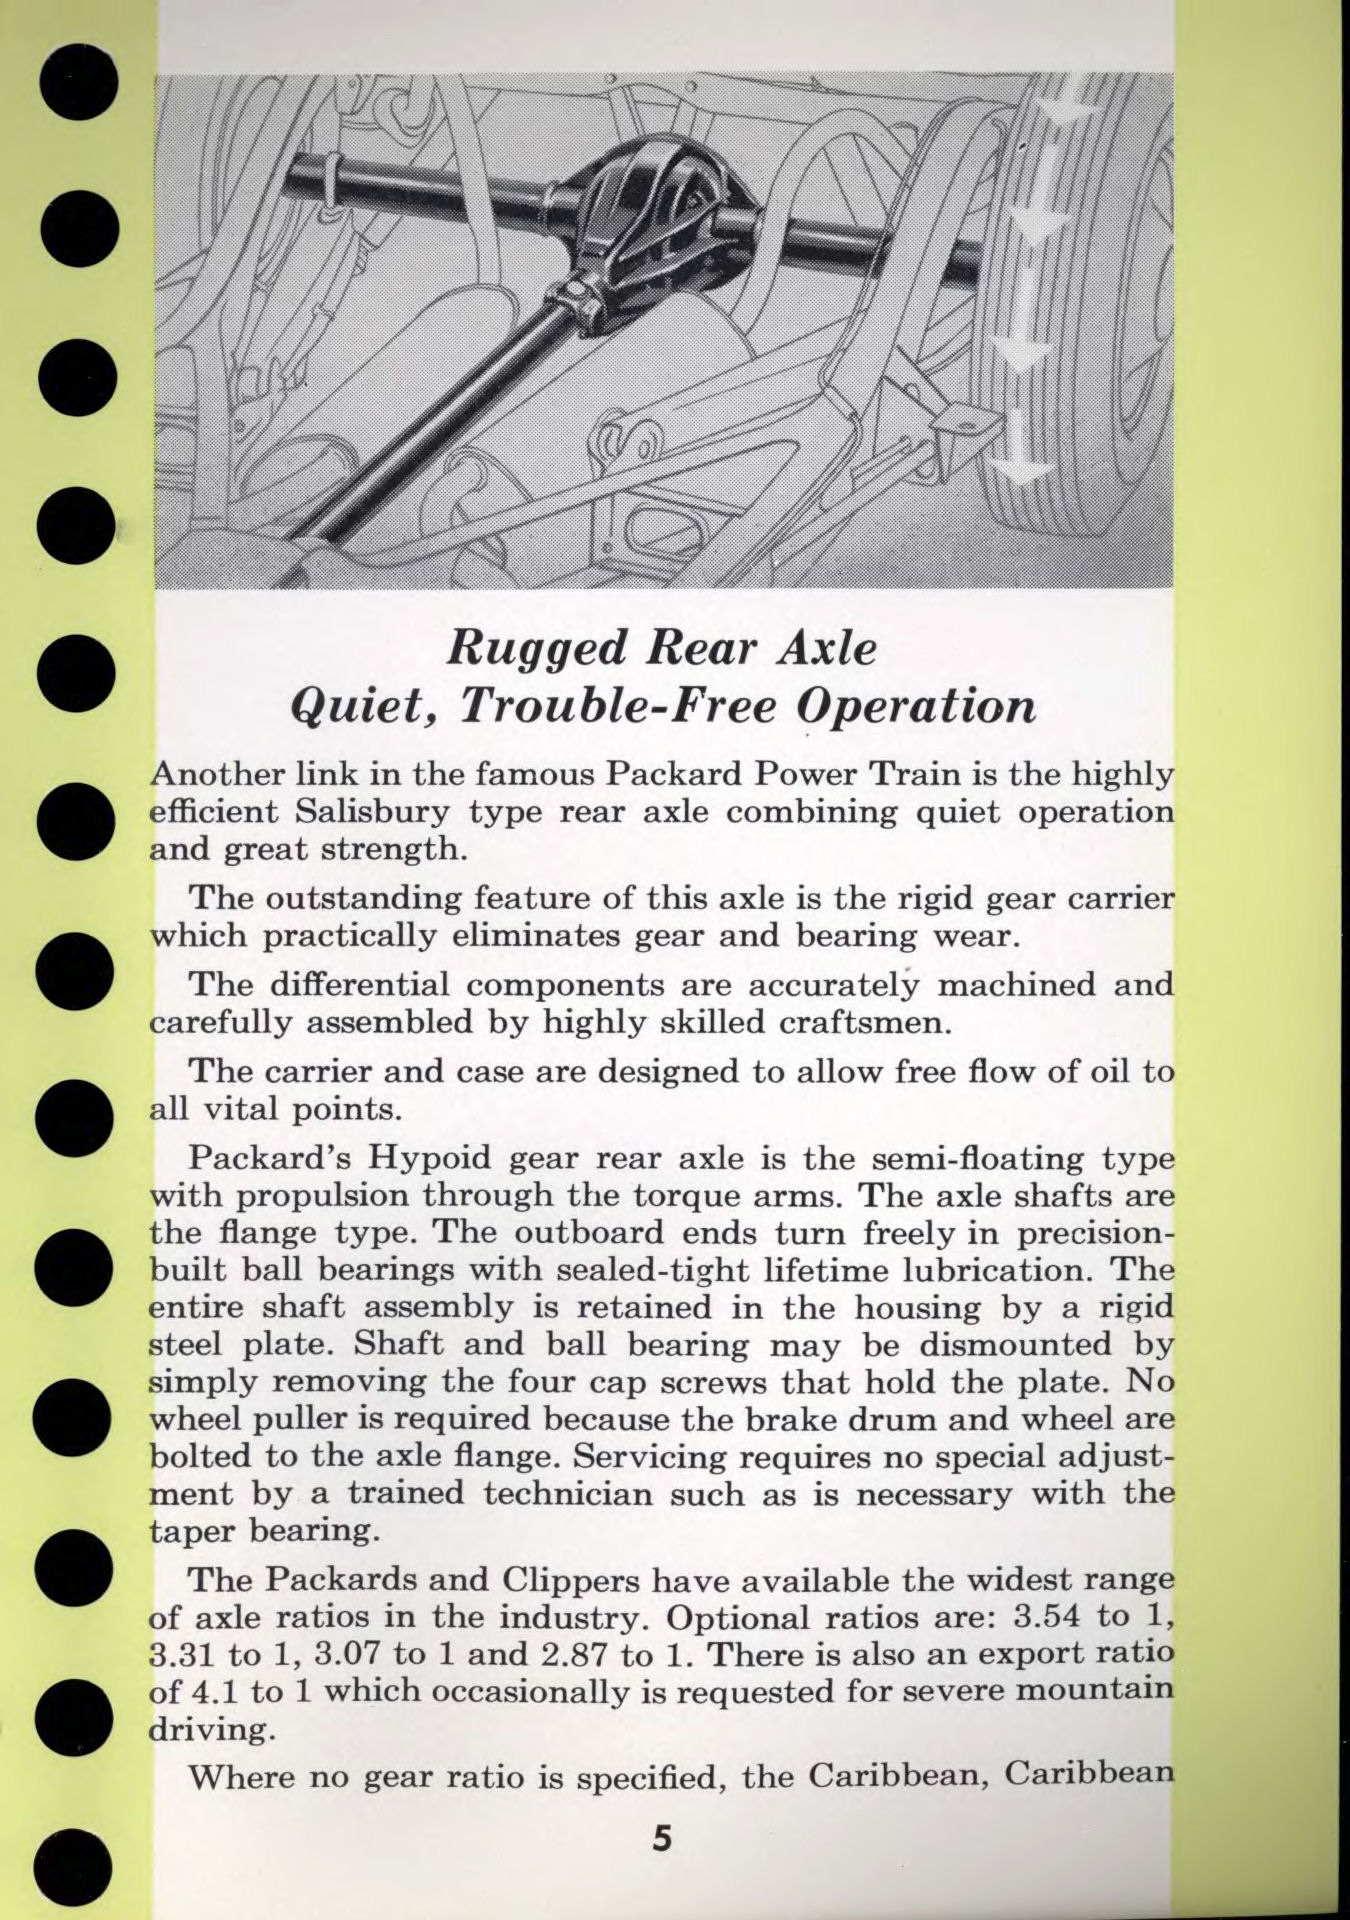 1956 Packard Data Book Page 13